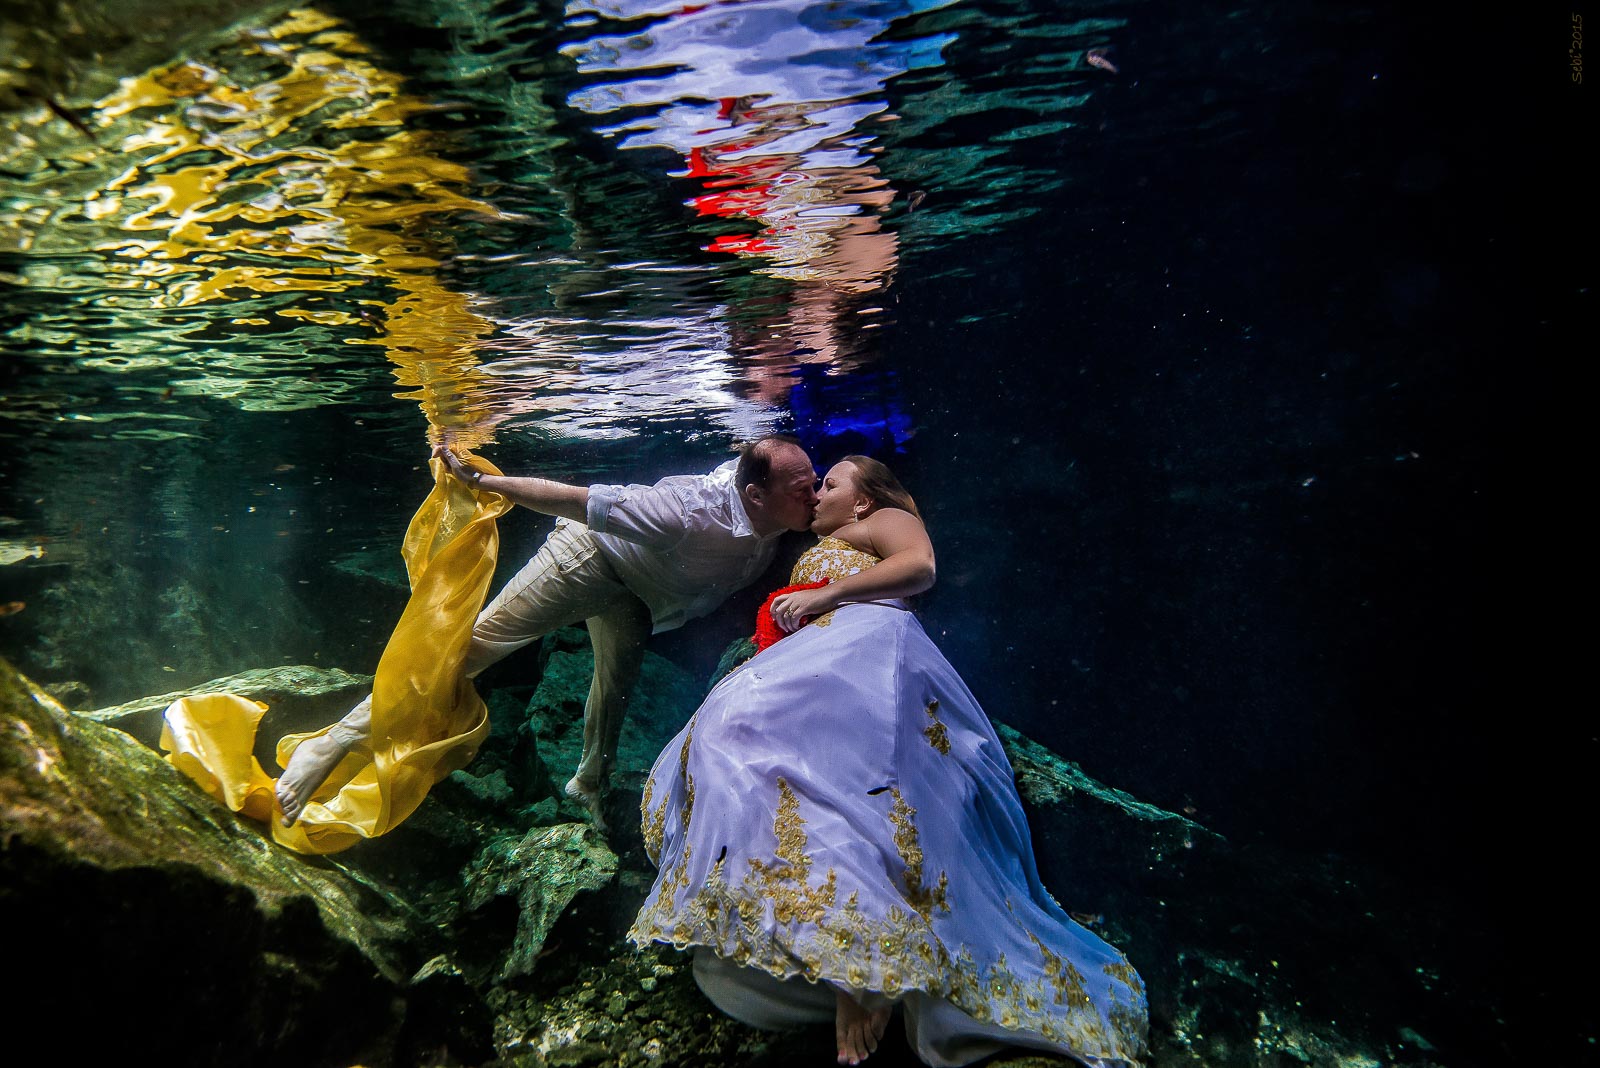 After Wedding Underwater Photo Shoot in Mexico